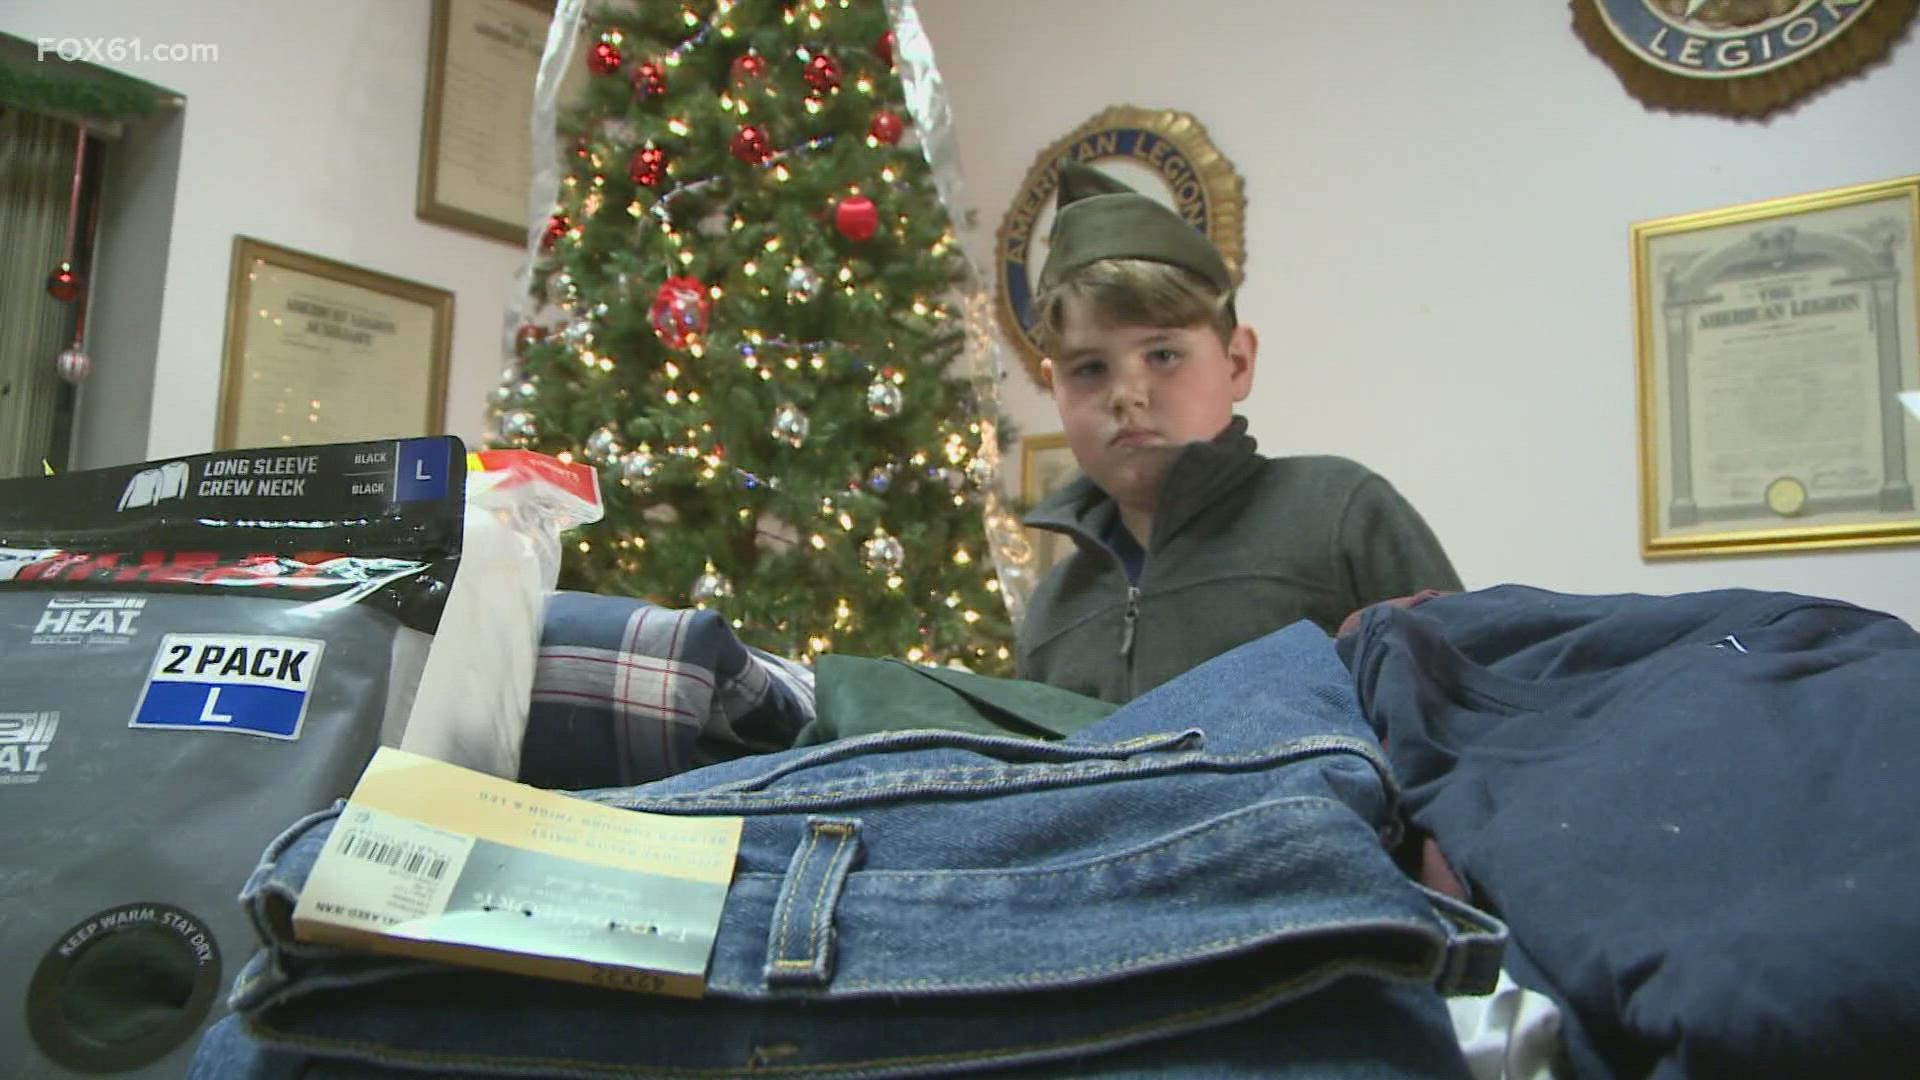 Owen Zavatone, 9, of Old Saybrook collected clothes and toiletries as holiday gifts for local veterans.